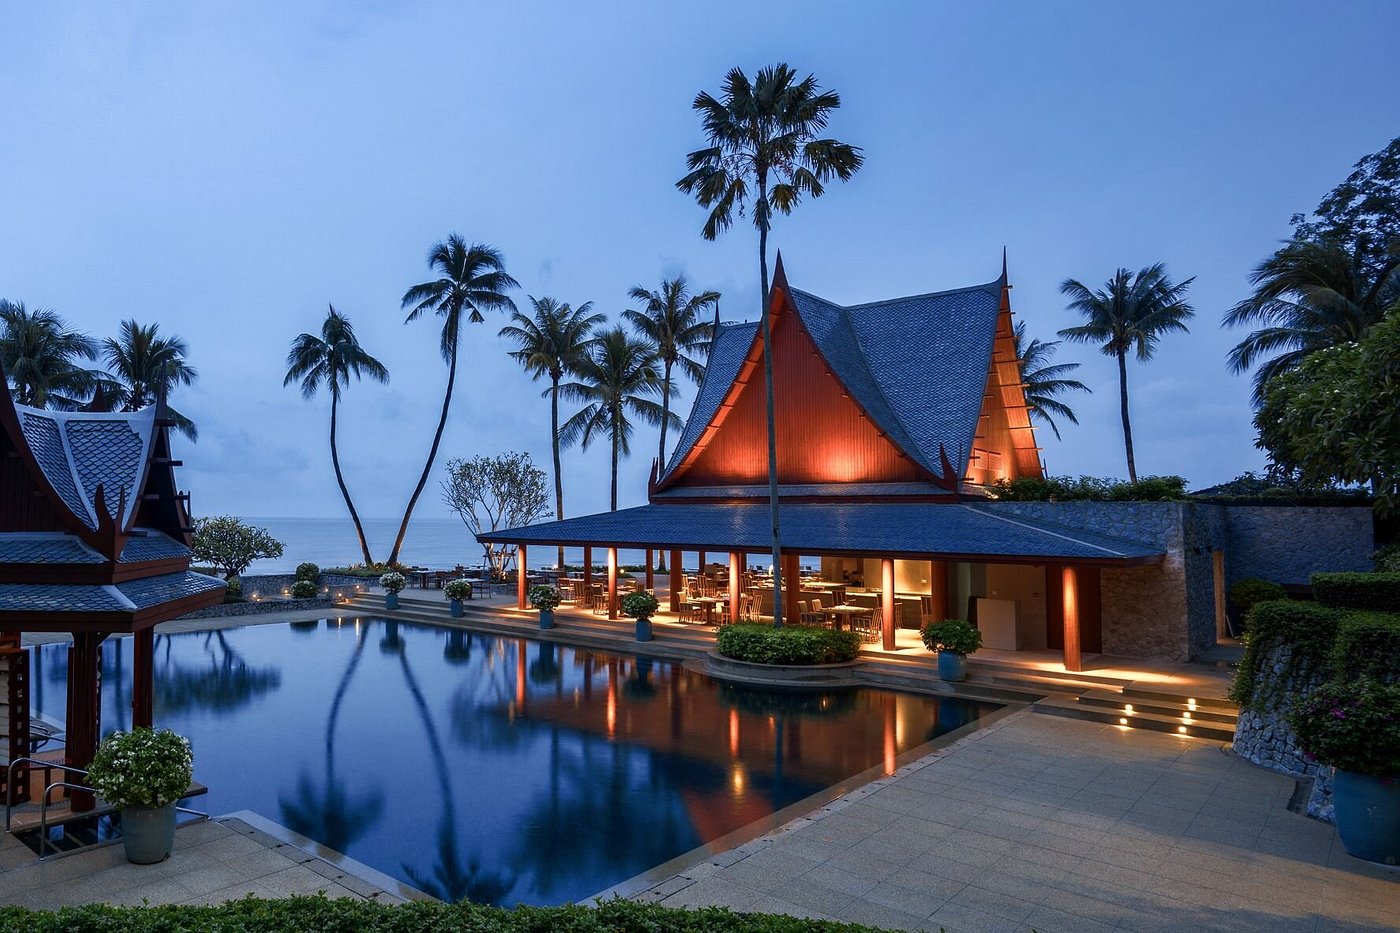 Rewire your system in Thailand’s wellness capital Hua Hin